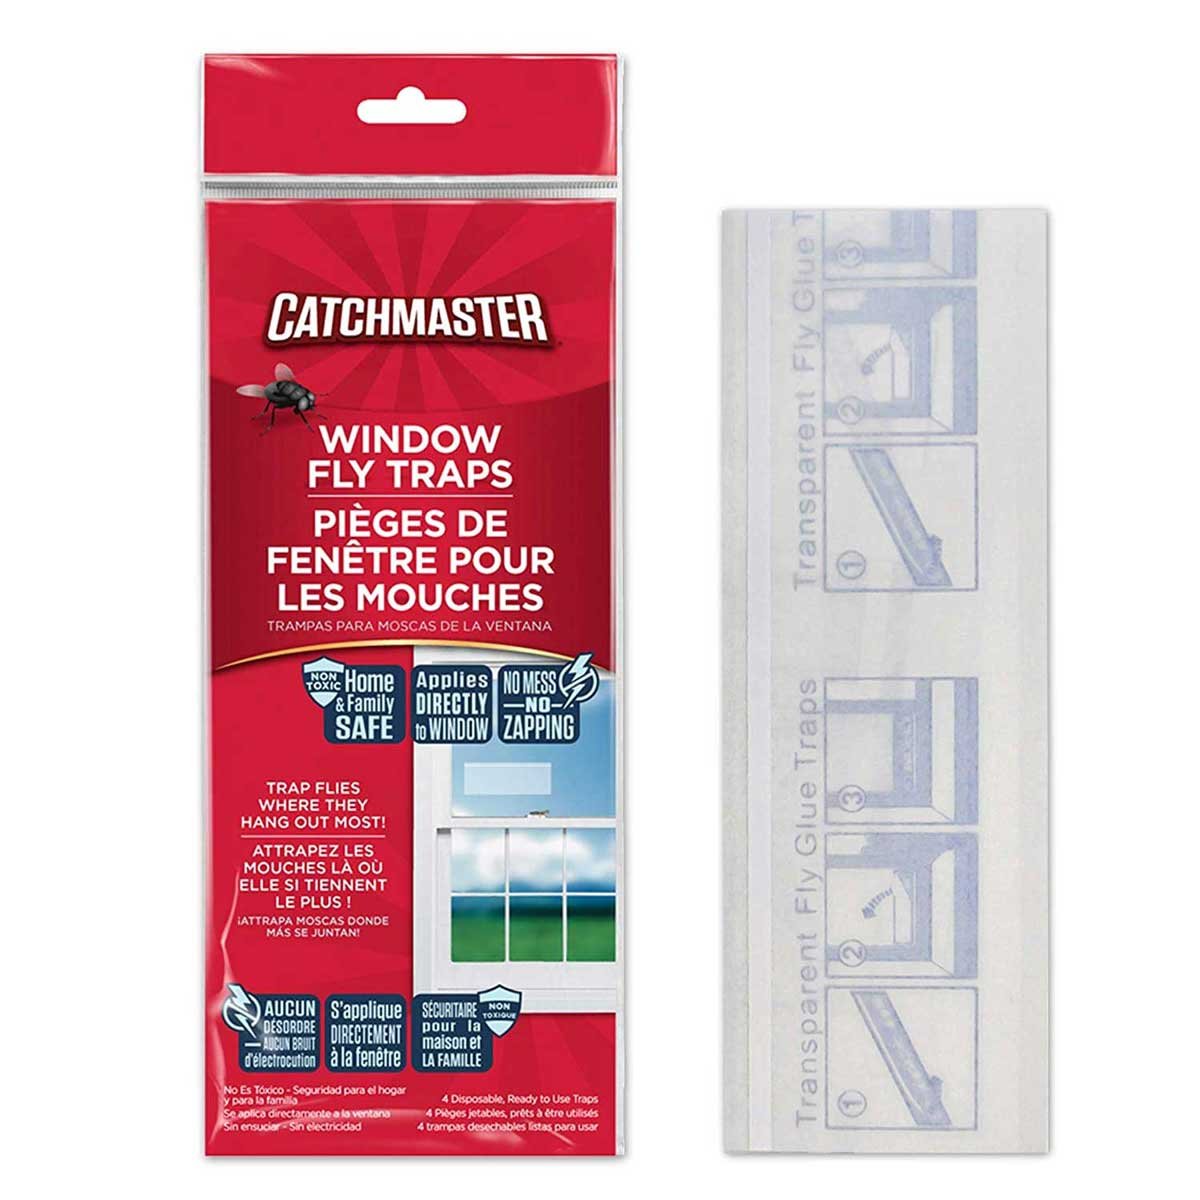 Catchmaster Bug & Clear Window Fly Traps- Best Fly Trap